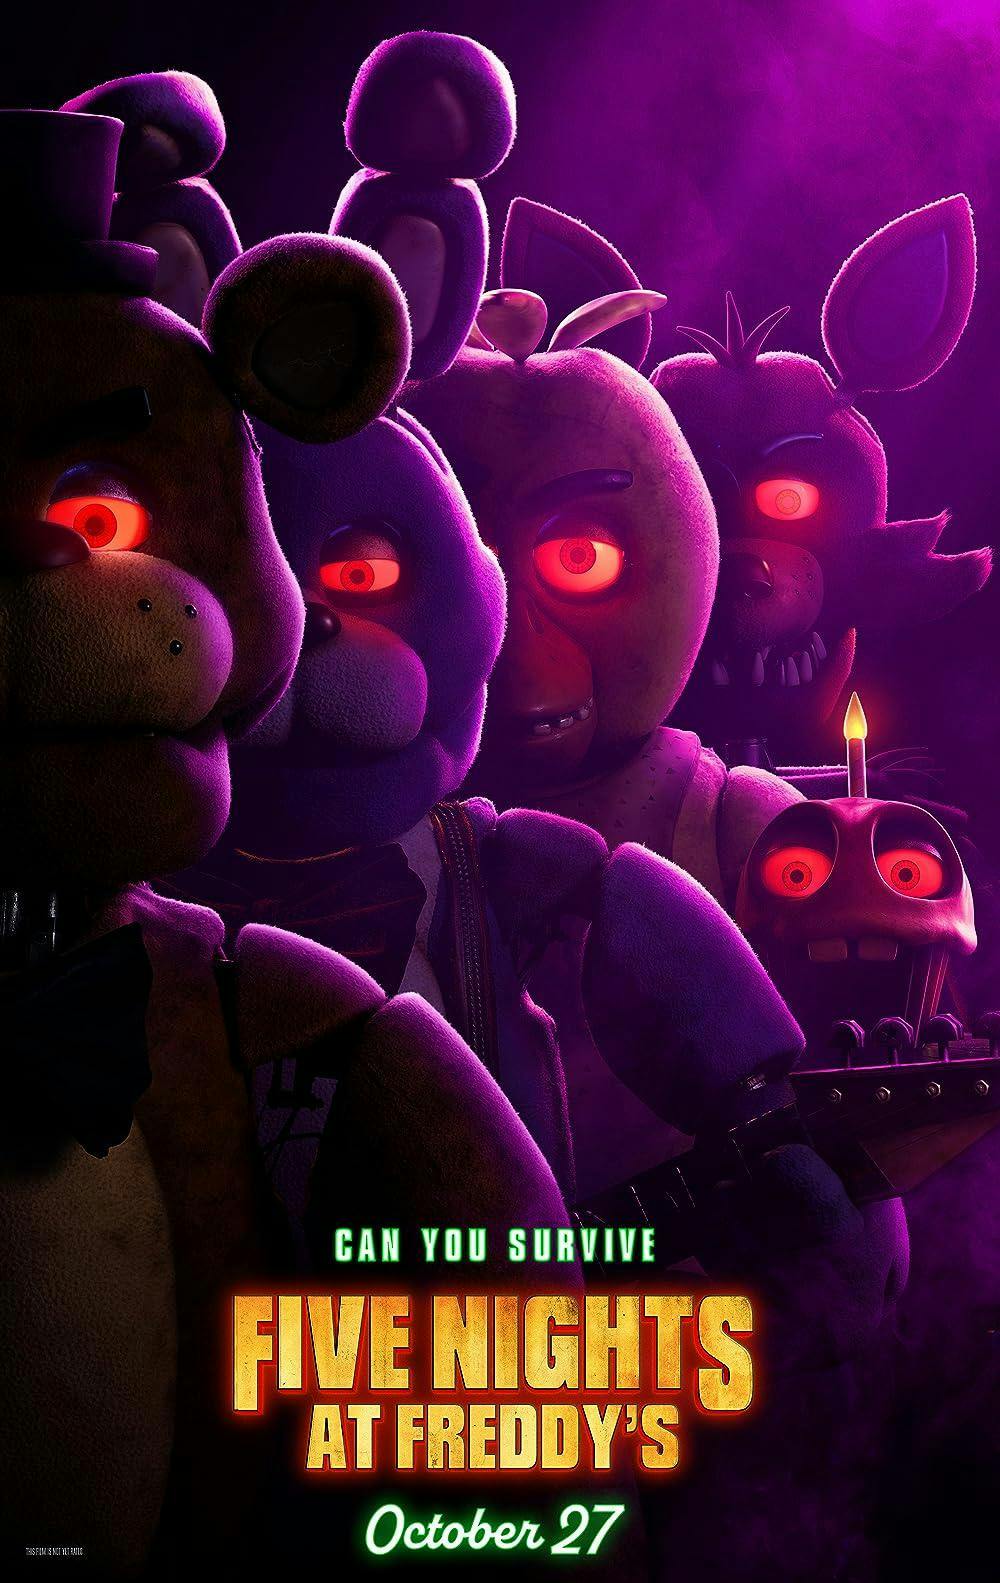 Review: “Five Nights at Freddy’s” brings a gaming franchise to the big screen